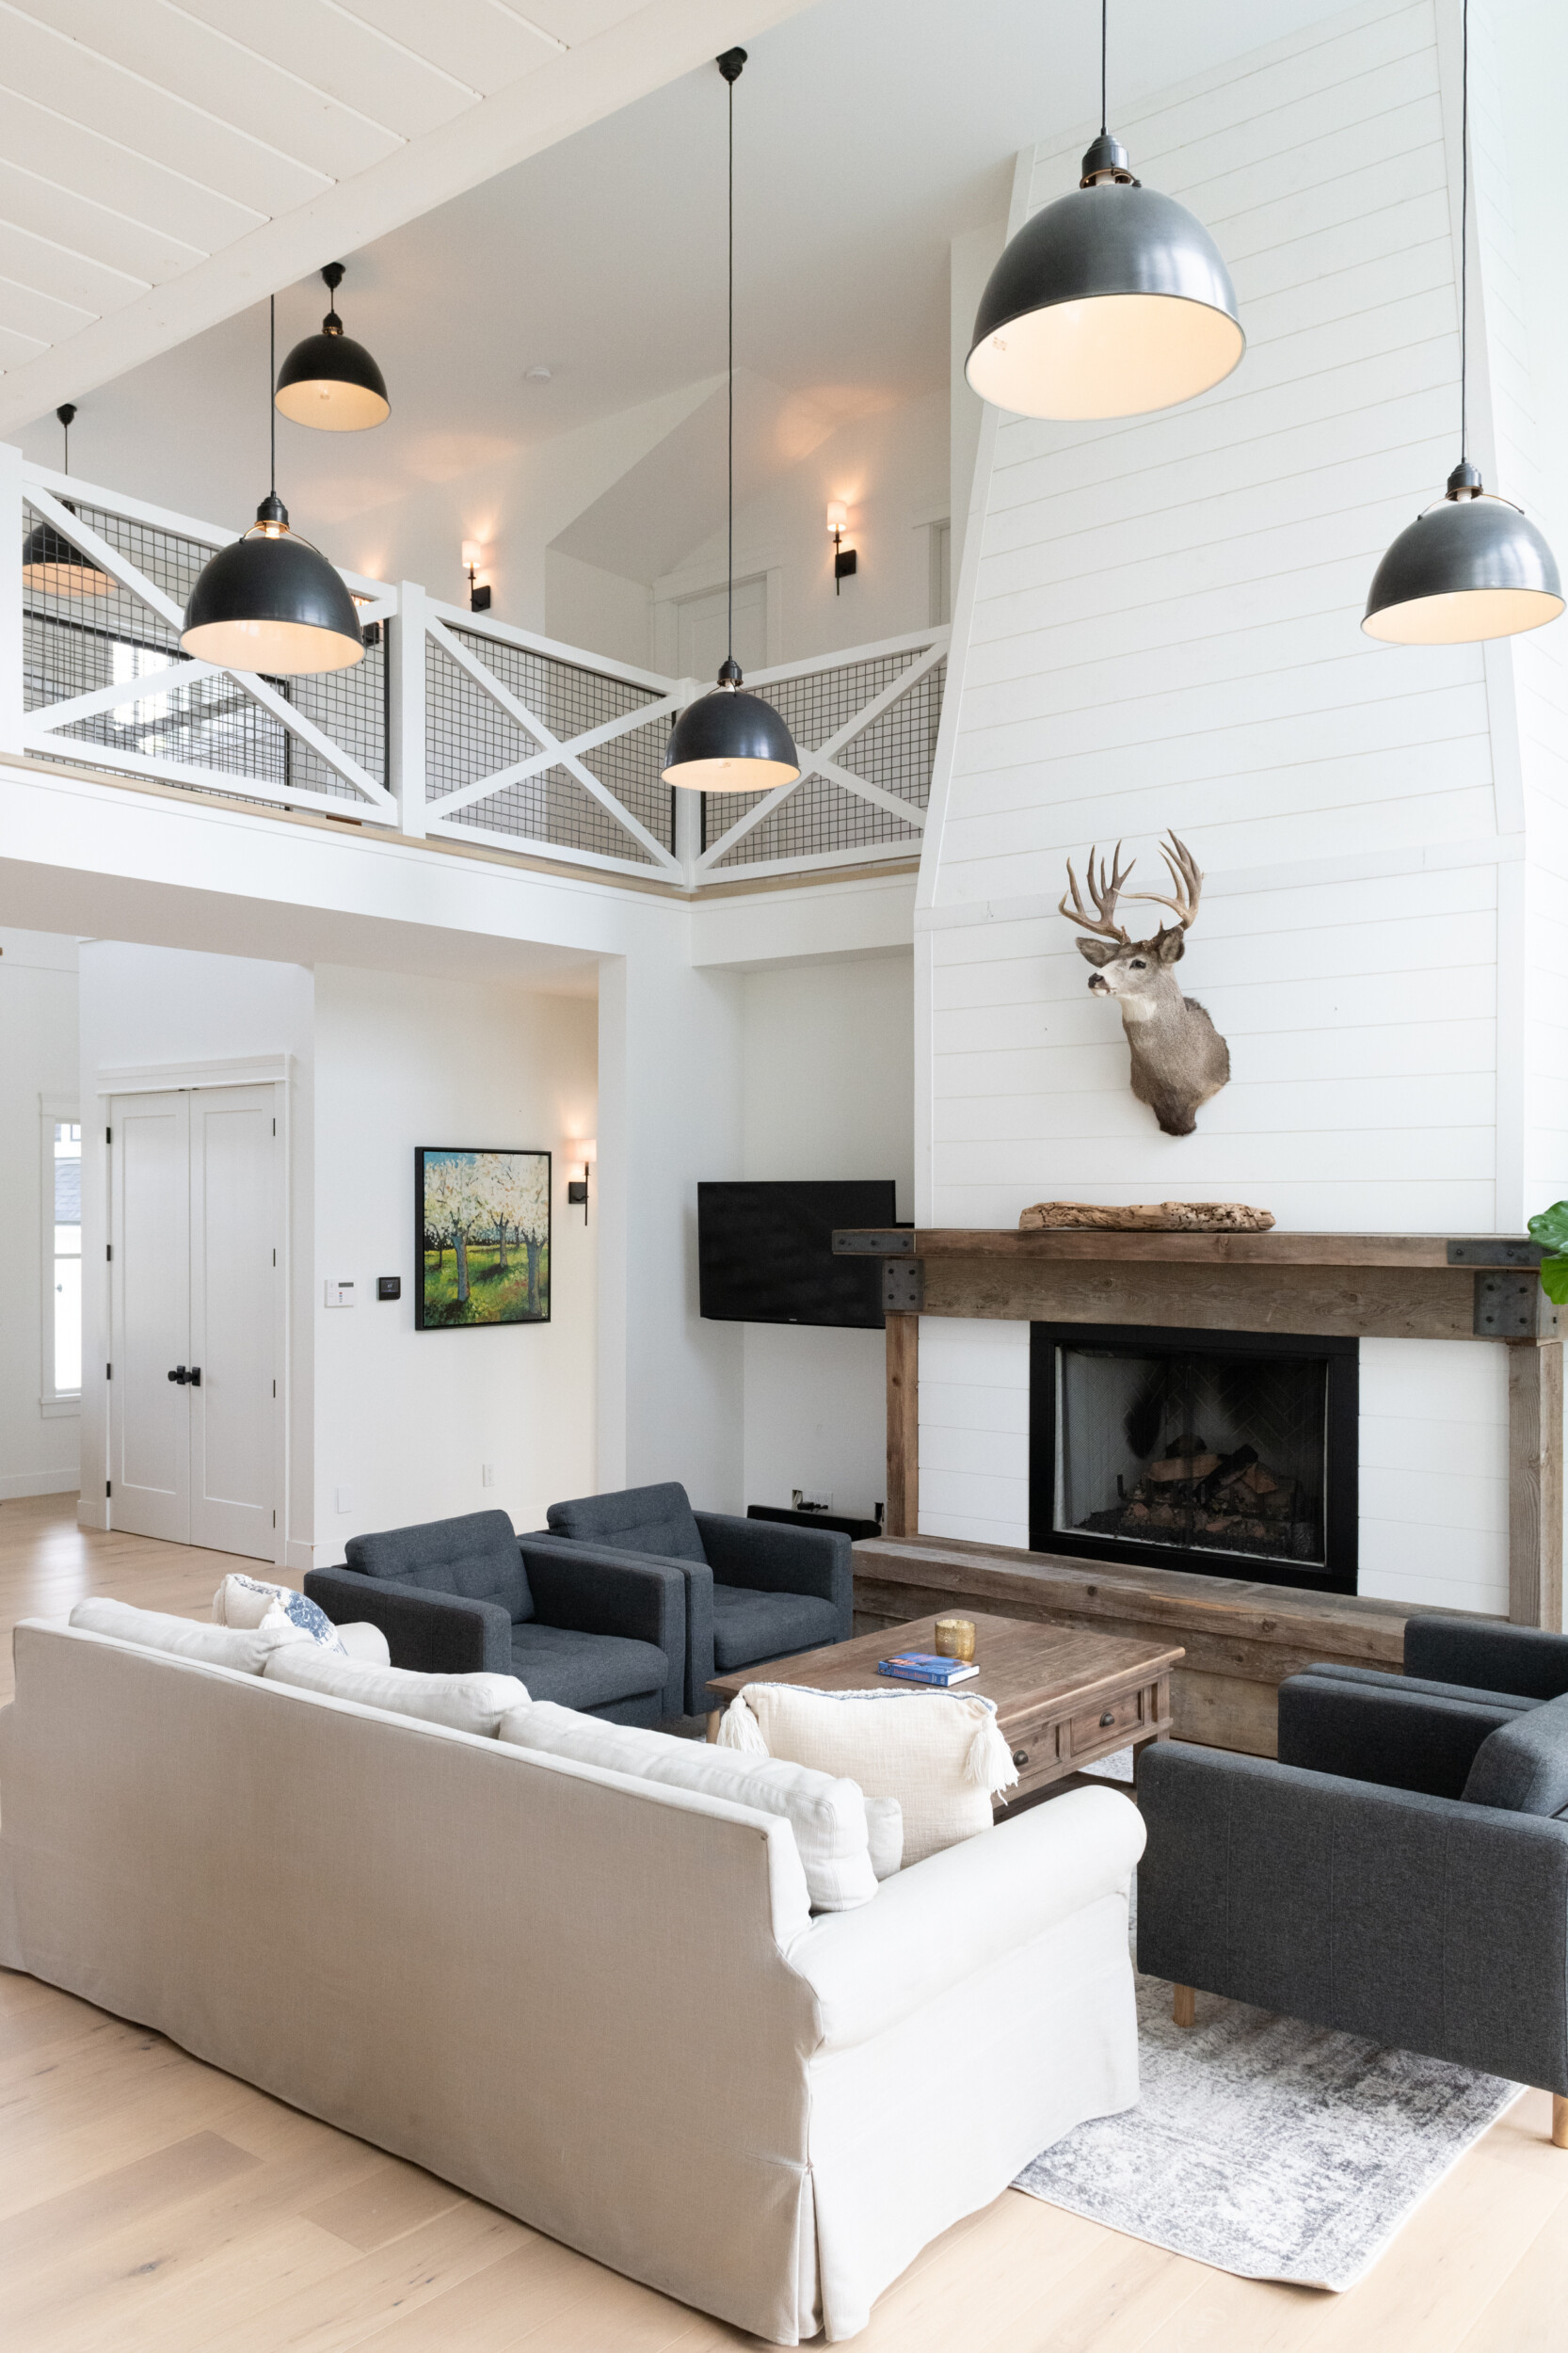 The Complete Guide To A Perfect Modern Farmhouse Interior - Décor Aid